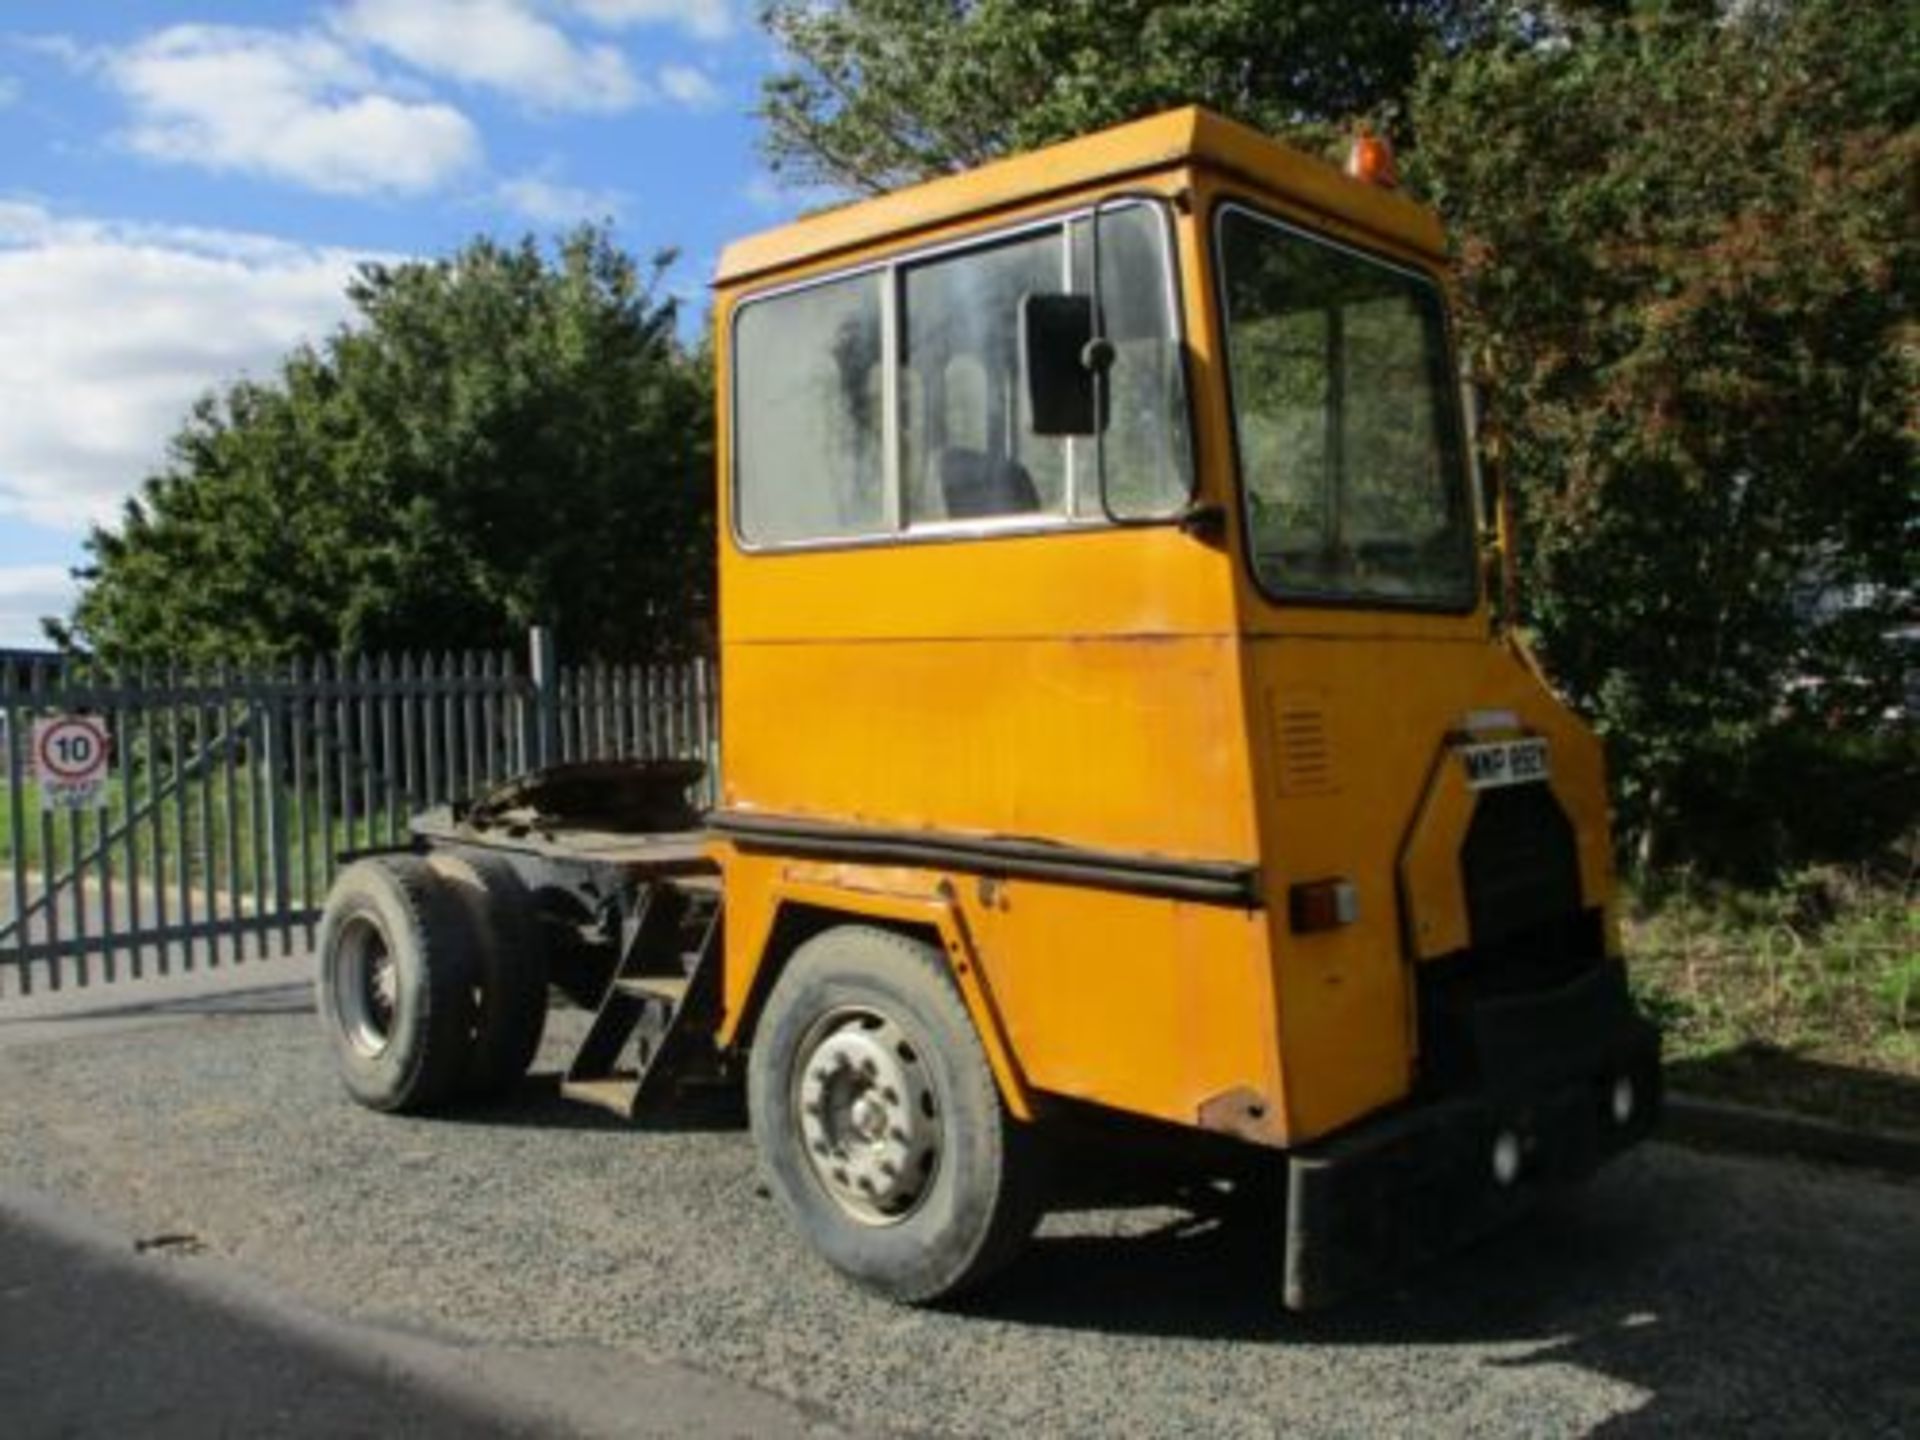 RELIANCE DOCK SPOTTER SHUNTER TOW TUG TRACTOR UNIT PERKINS V8 TERBERG DELIVERY - Image 10 of 11